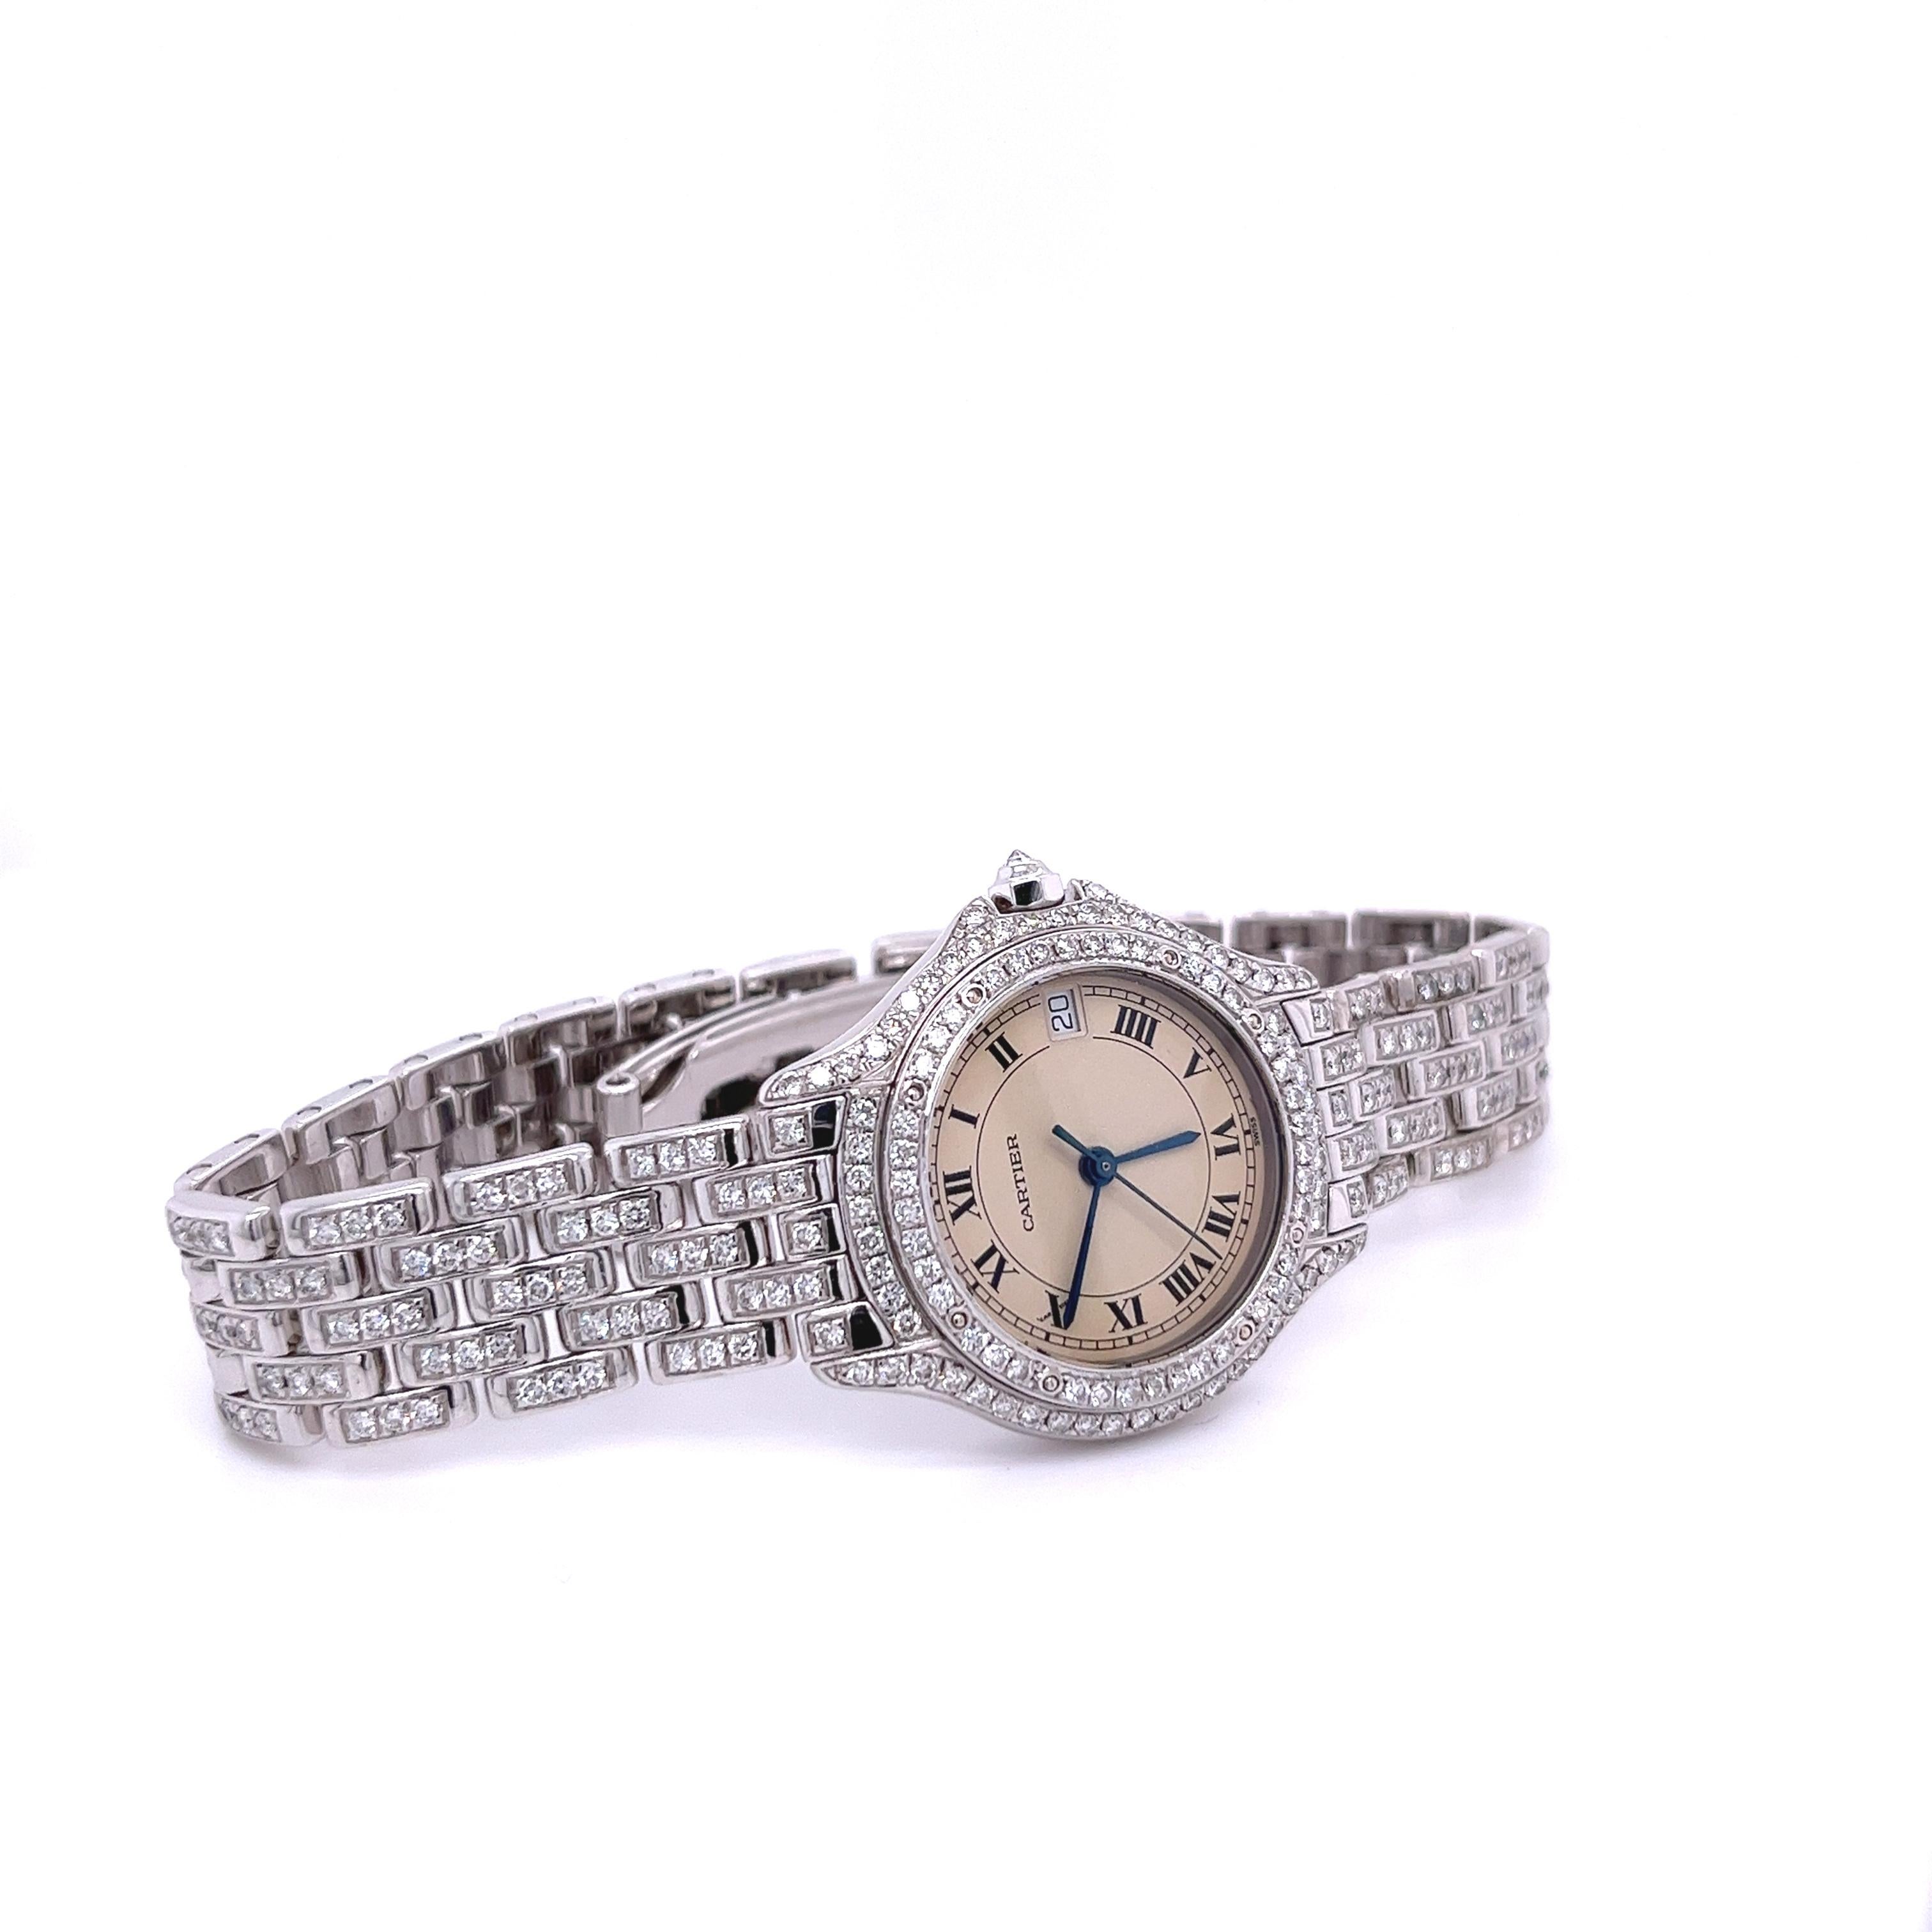 Cartier Ladies Watch in 18k White Gold and Round Cut Diamonds In Excellent Condition For Sale In Miami, FL